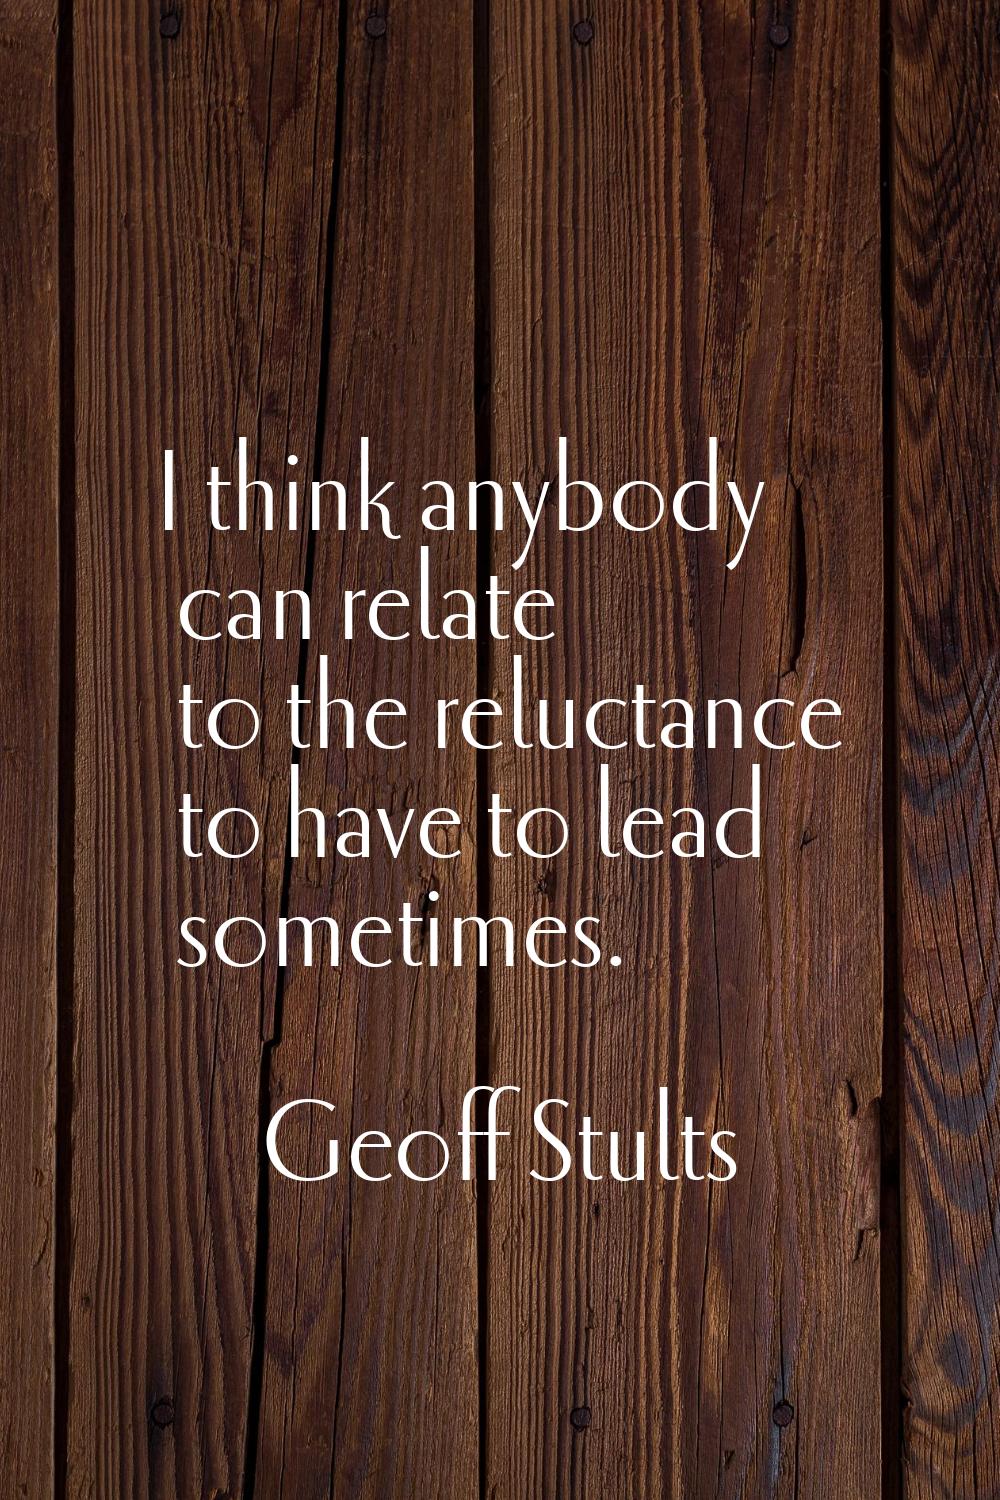 I think anybody can relate to the reluctance to have to lead sometimes.